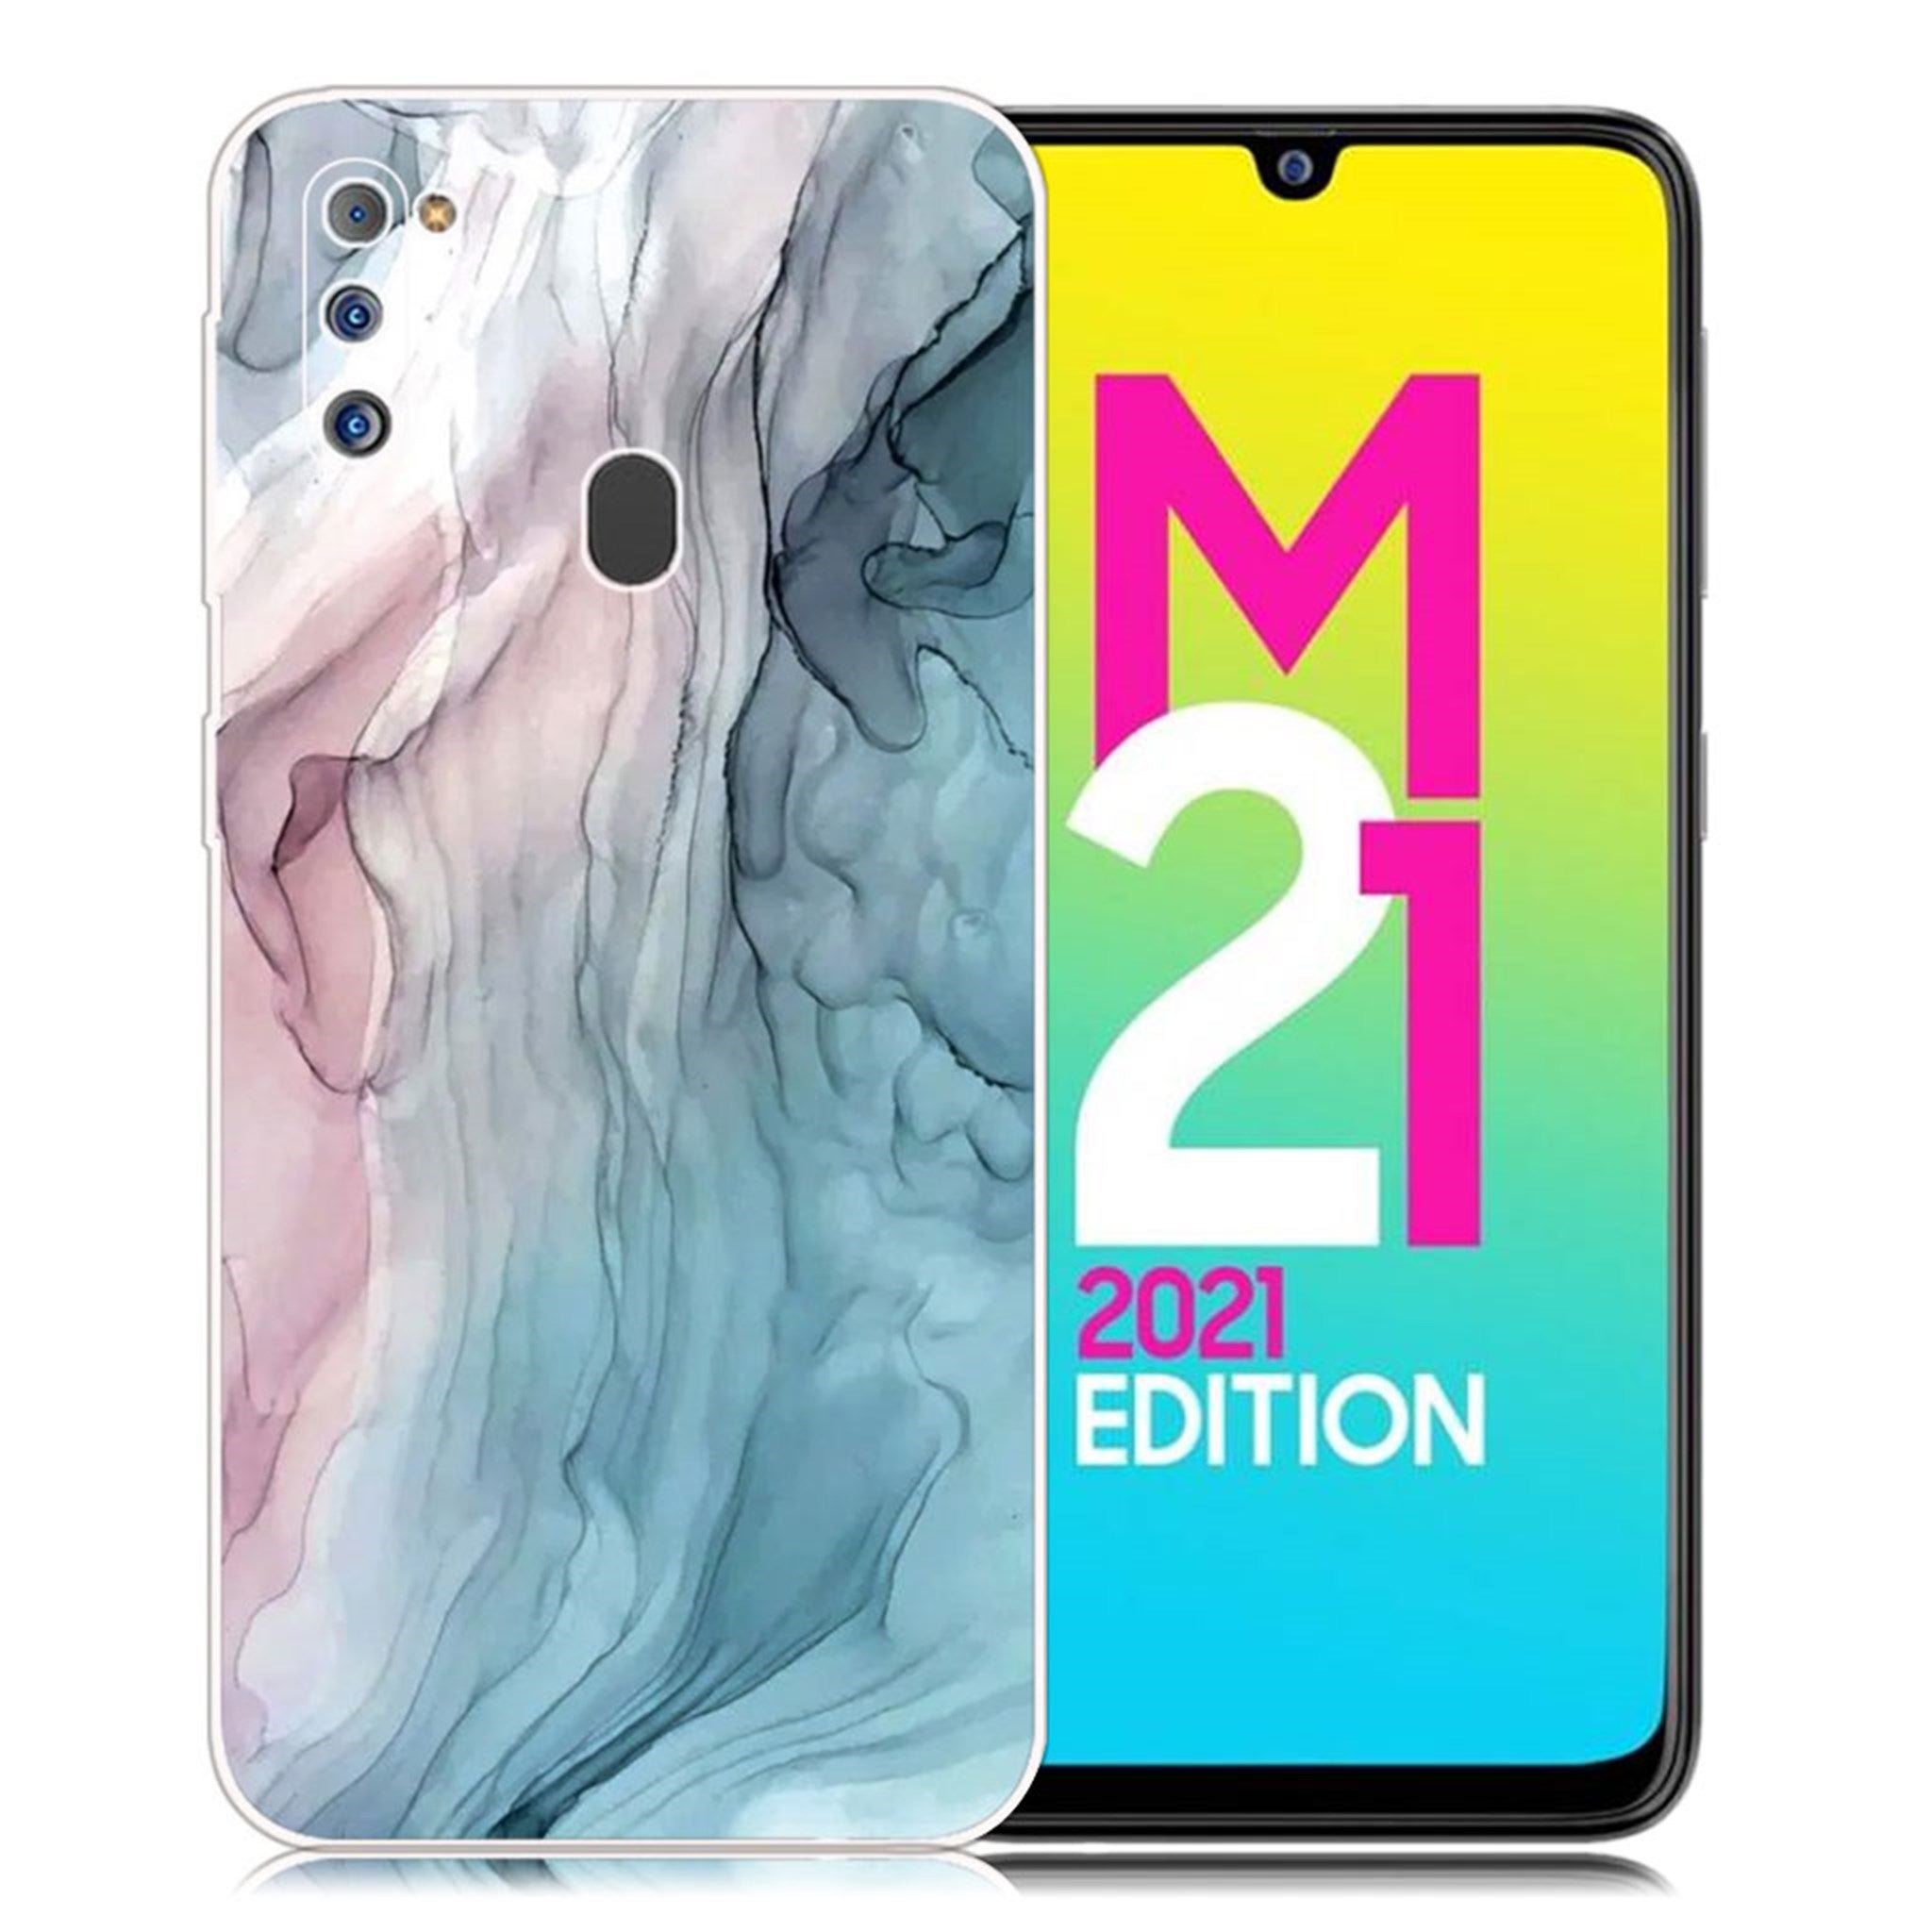 Marble Samsung Galaxy M21 2021 case - Rose / Blue Marble